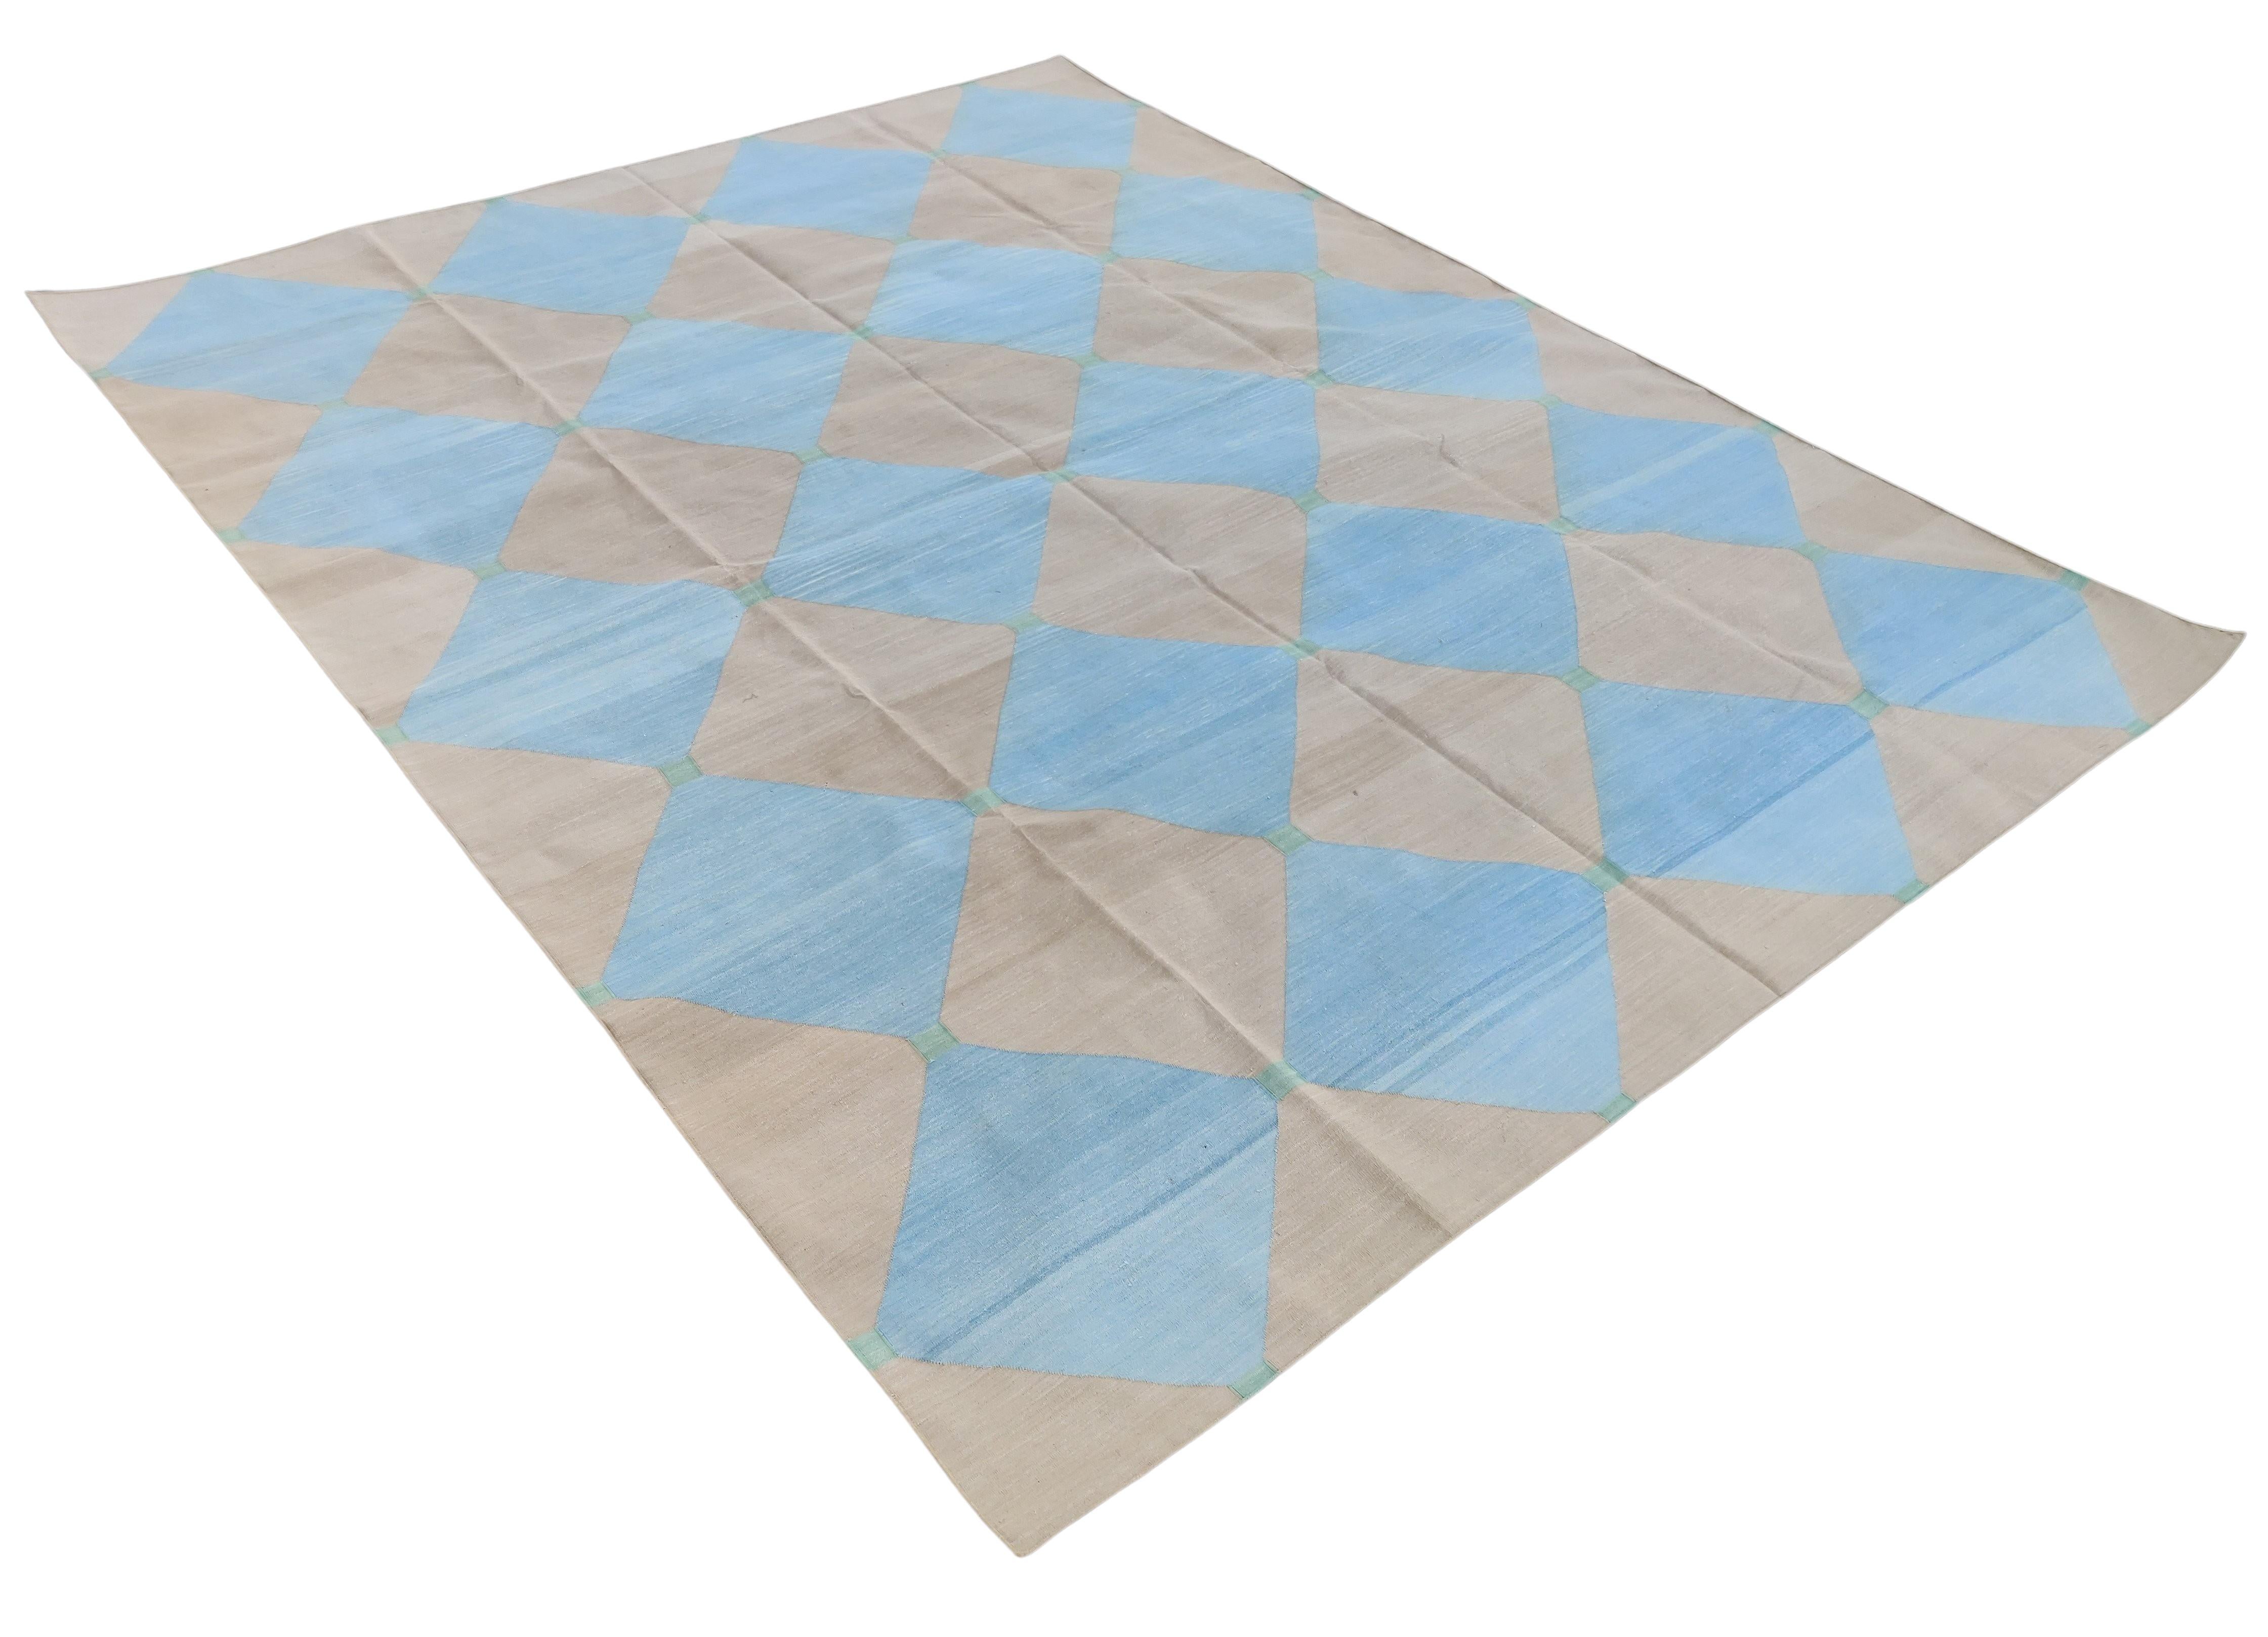 Cotton Vegetable Dyed Reversible Beige And Blue Indian Tile Checked Rug - 8'x10'
These special flat-weave dhurries are hand-woven with 15 ply 100% cotton yarn. Due to the special manufacturing techniques used to create our rugs, the size and color